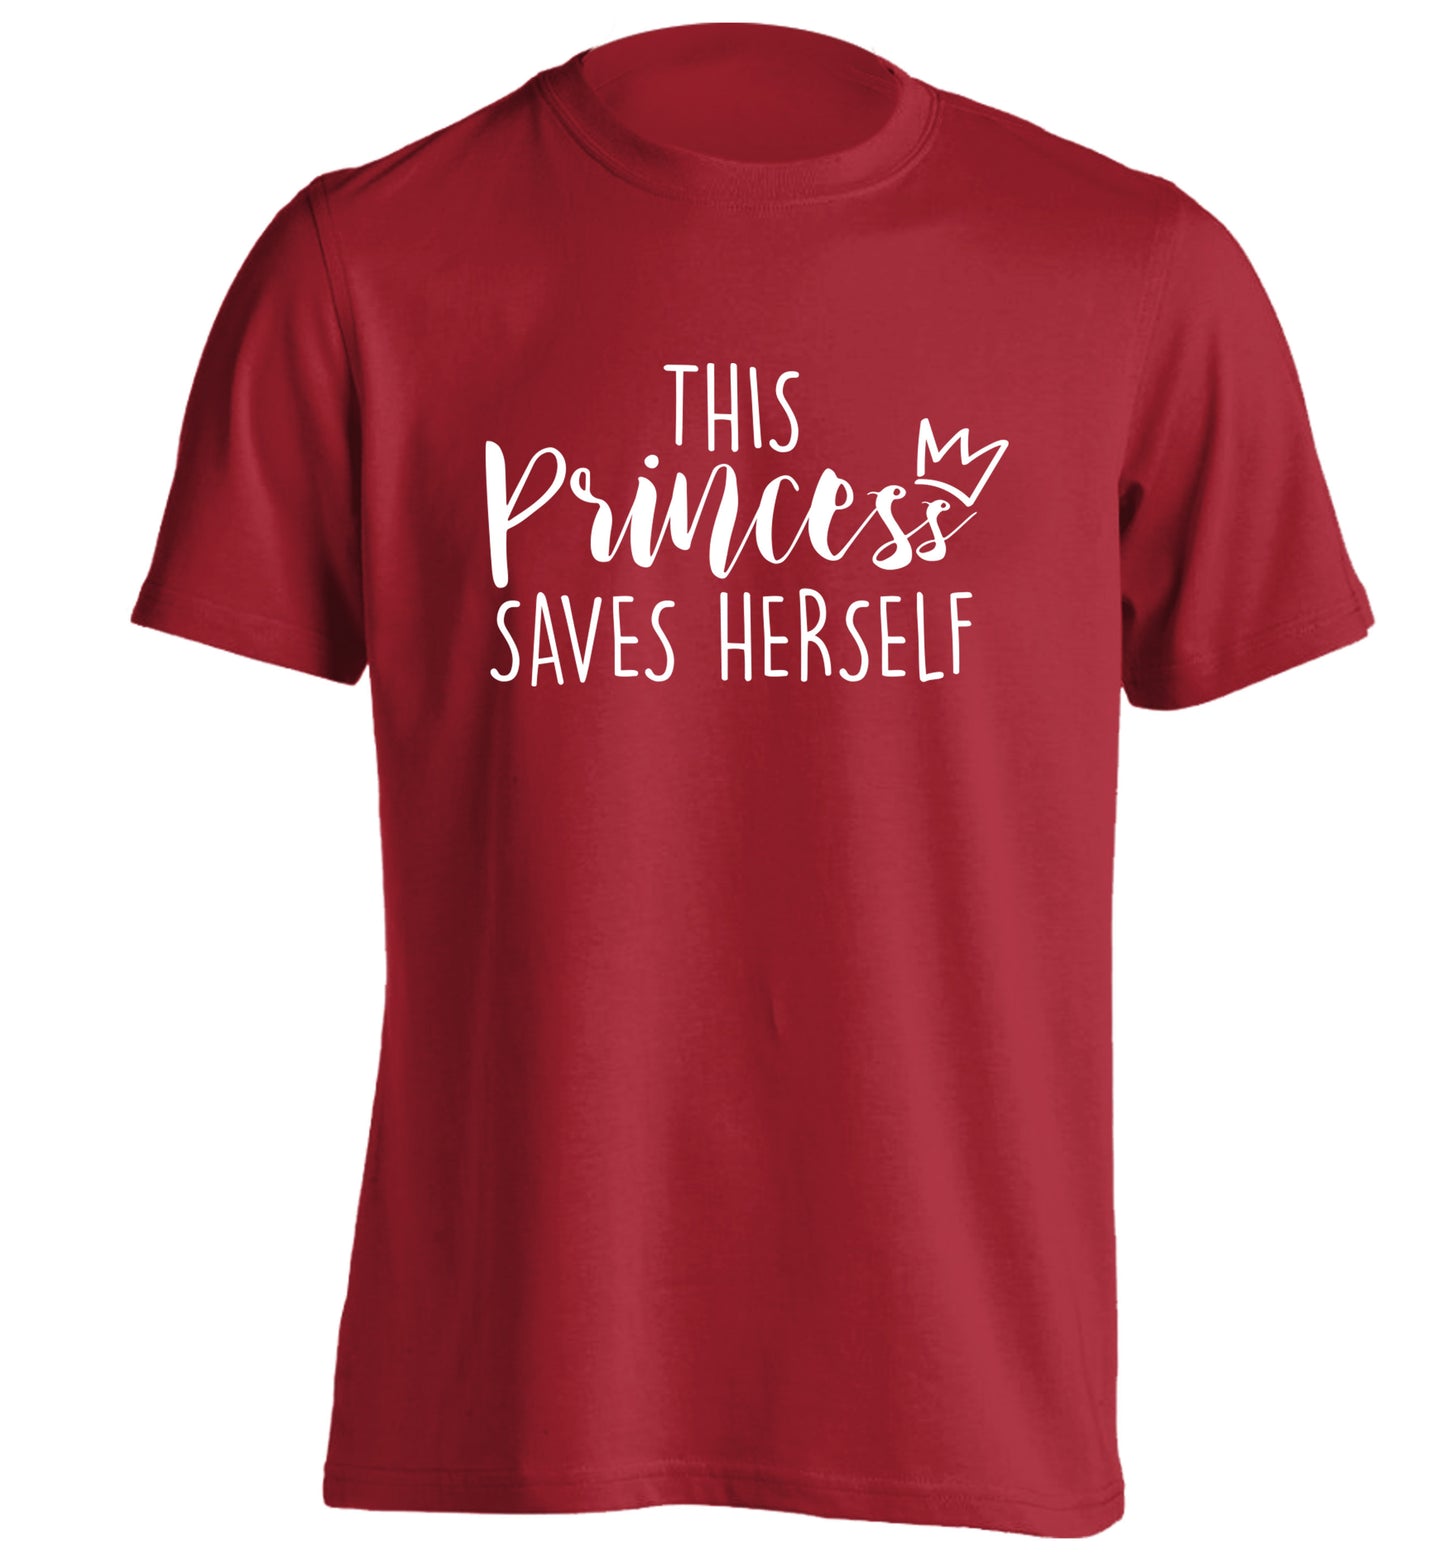 This princess saves herself adults unisex red Tshirt 2XL